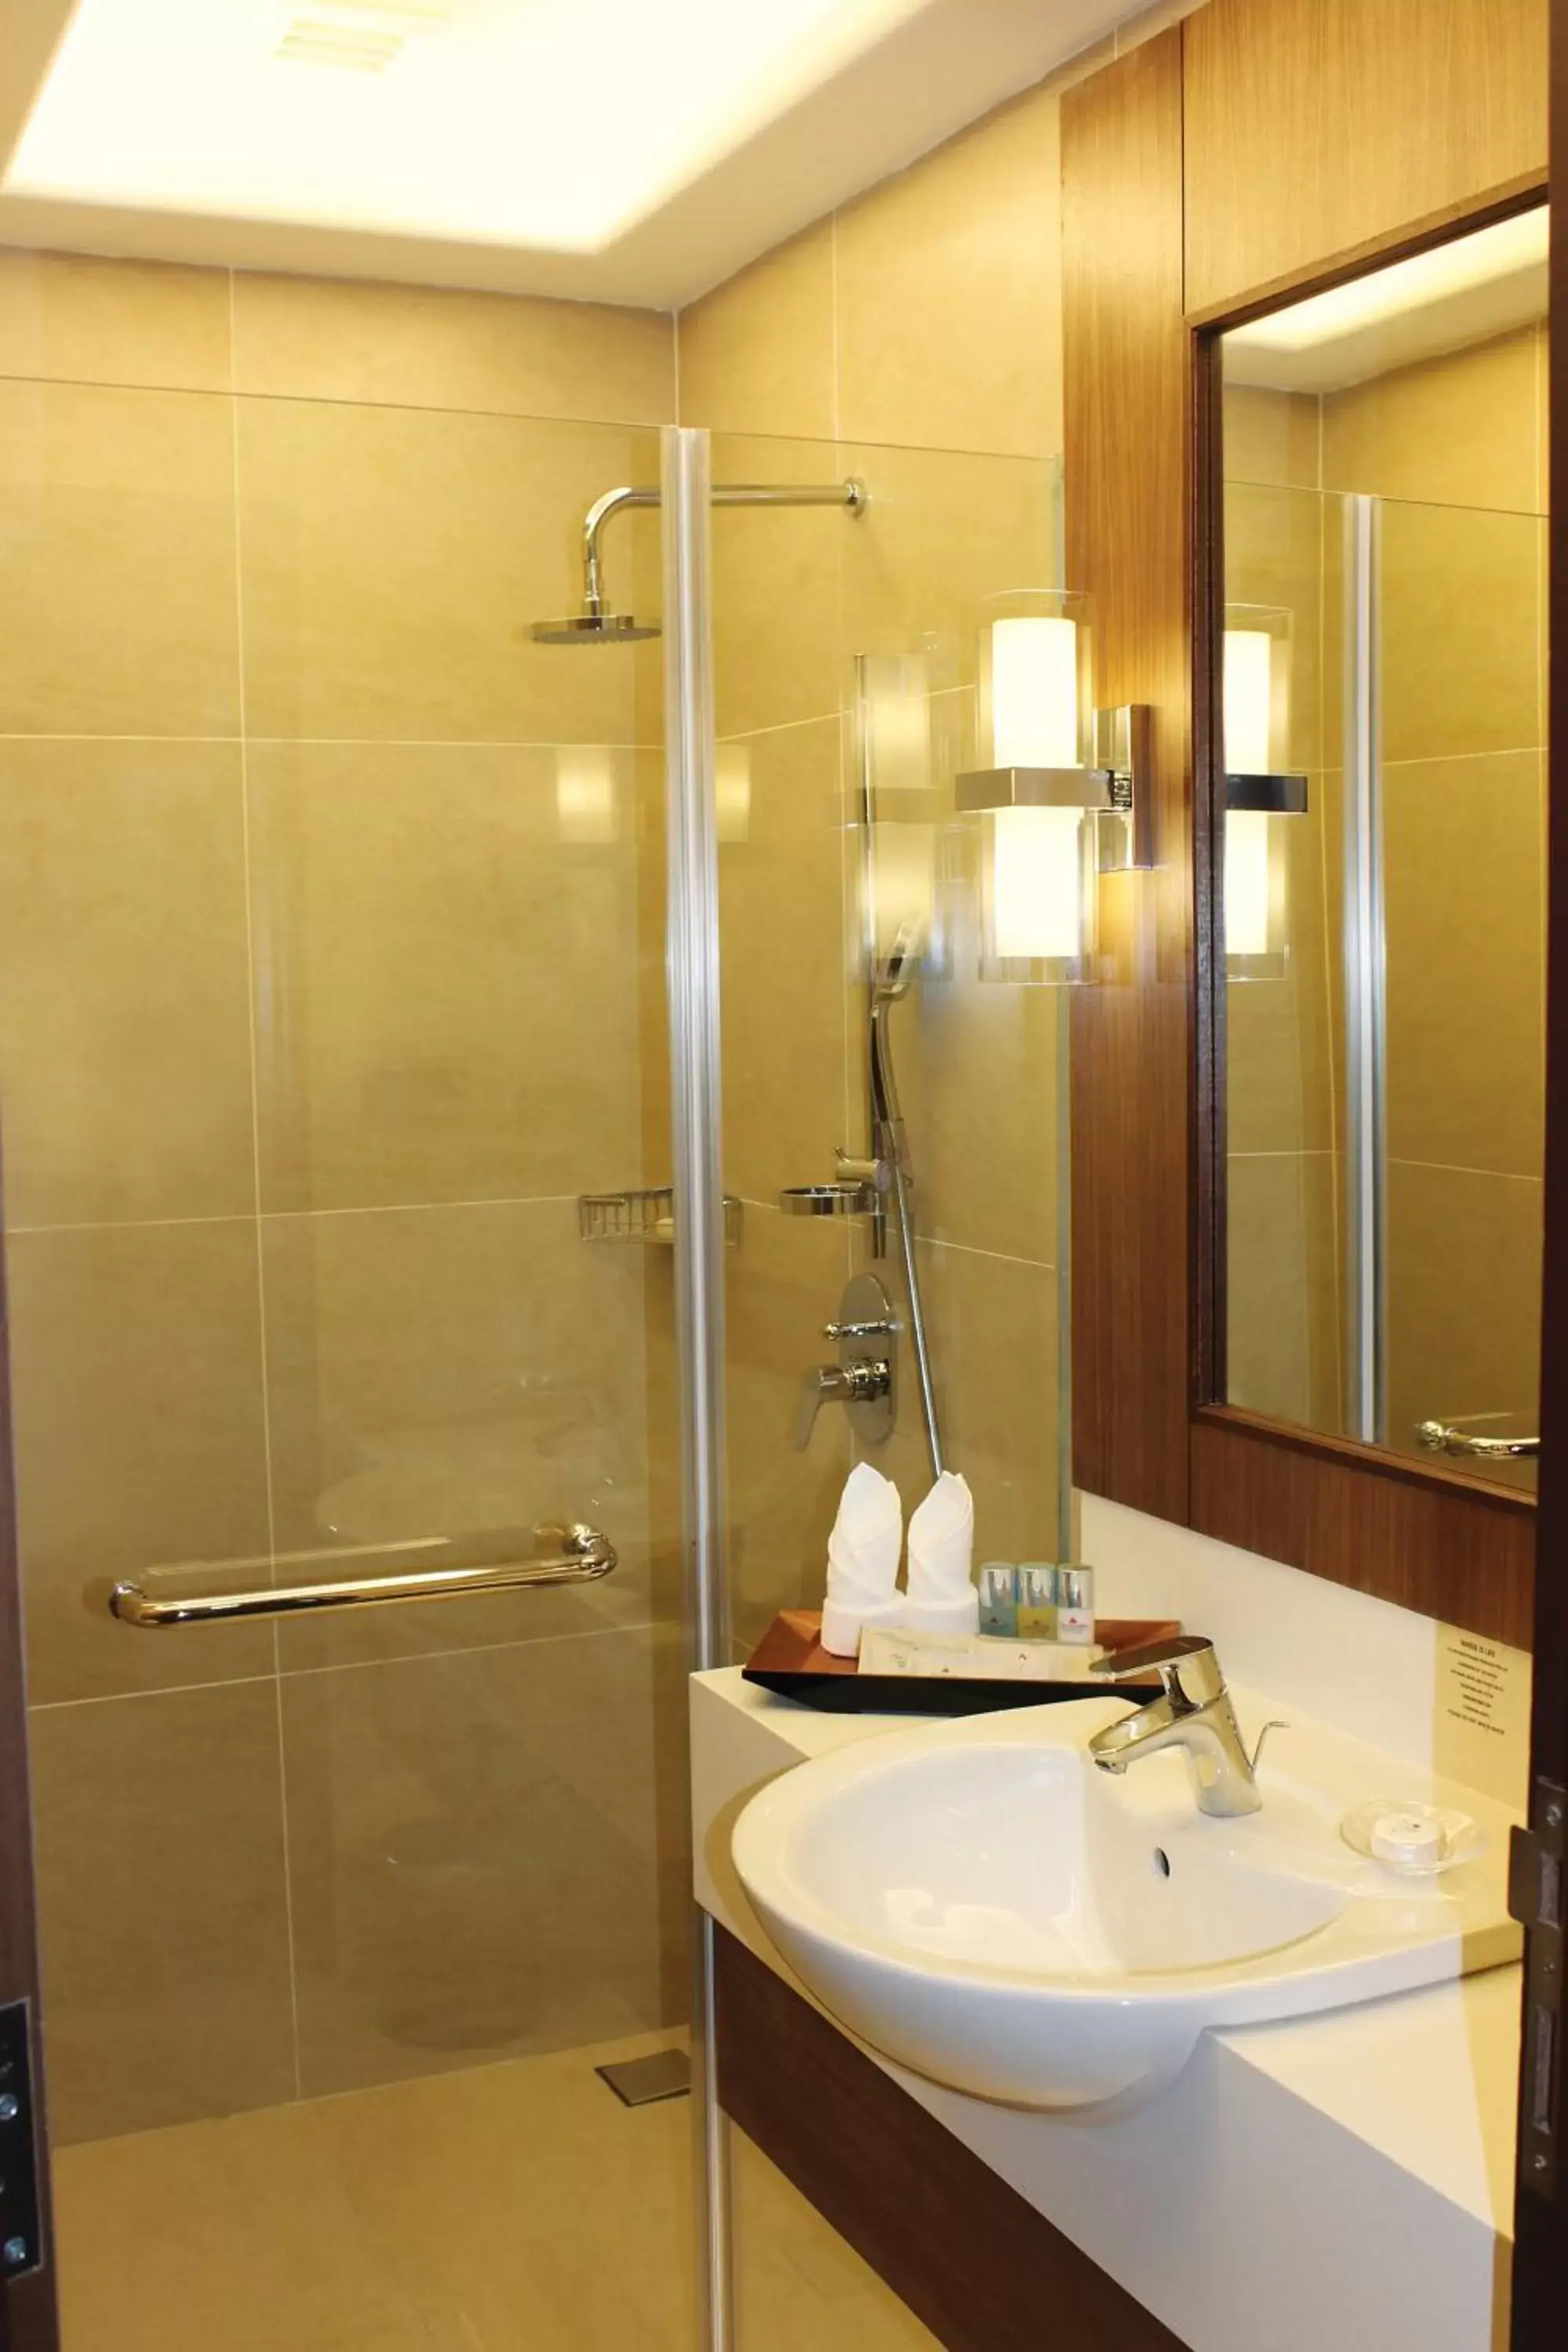 Bathroom in The Wembley – A St Giles Hotel, Penang